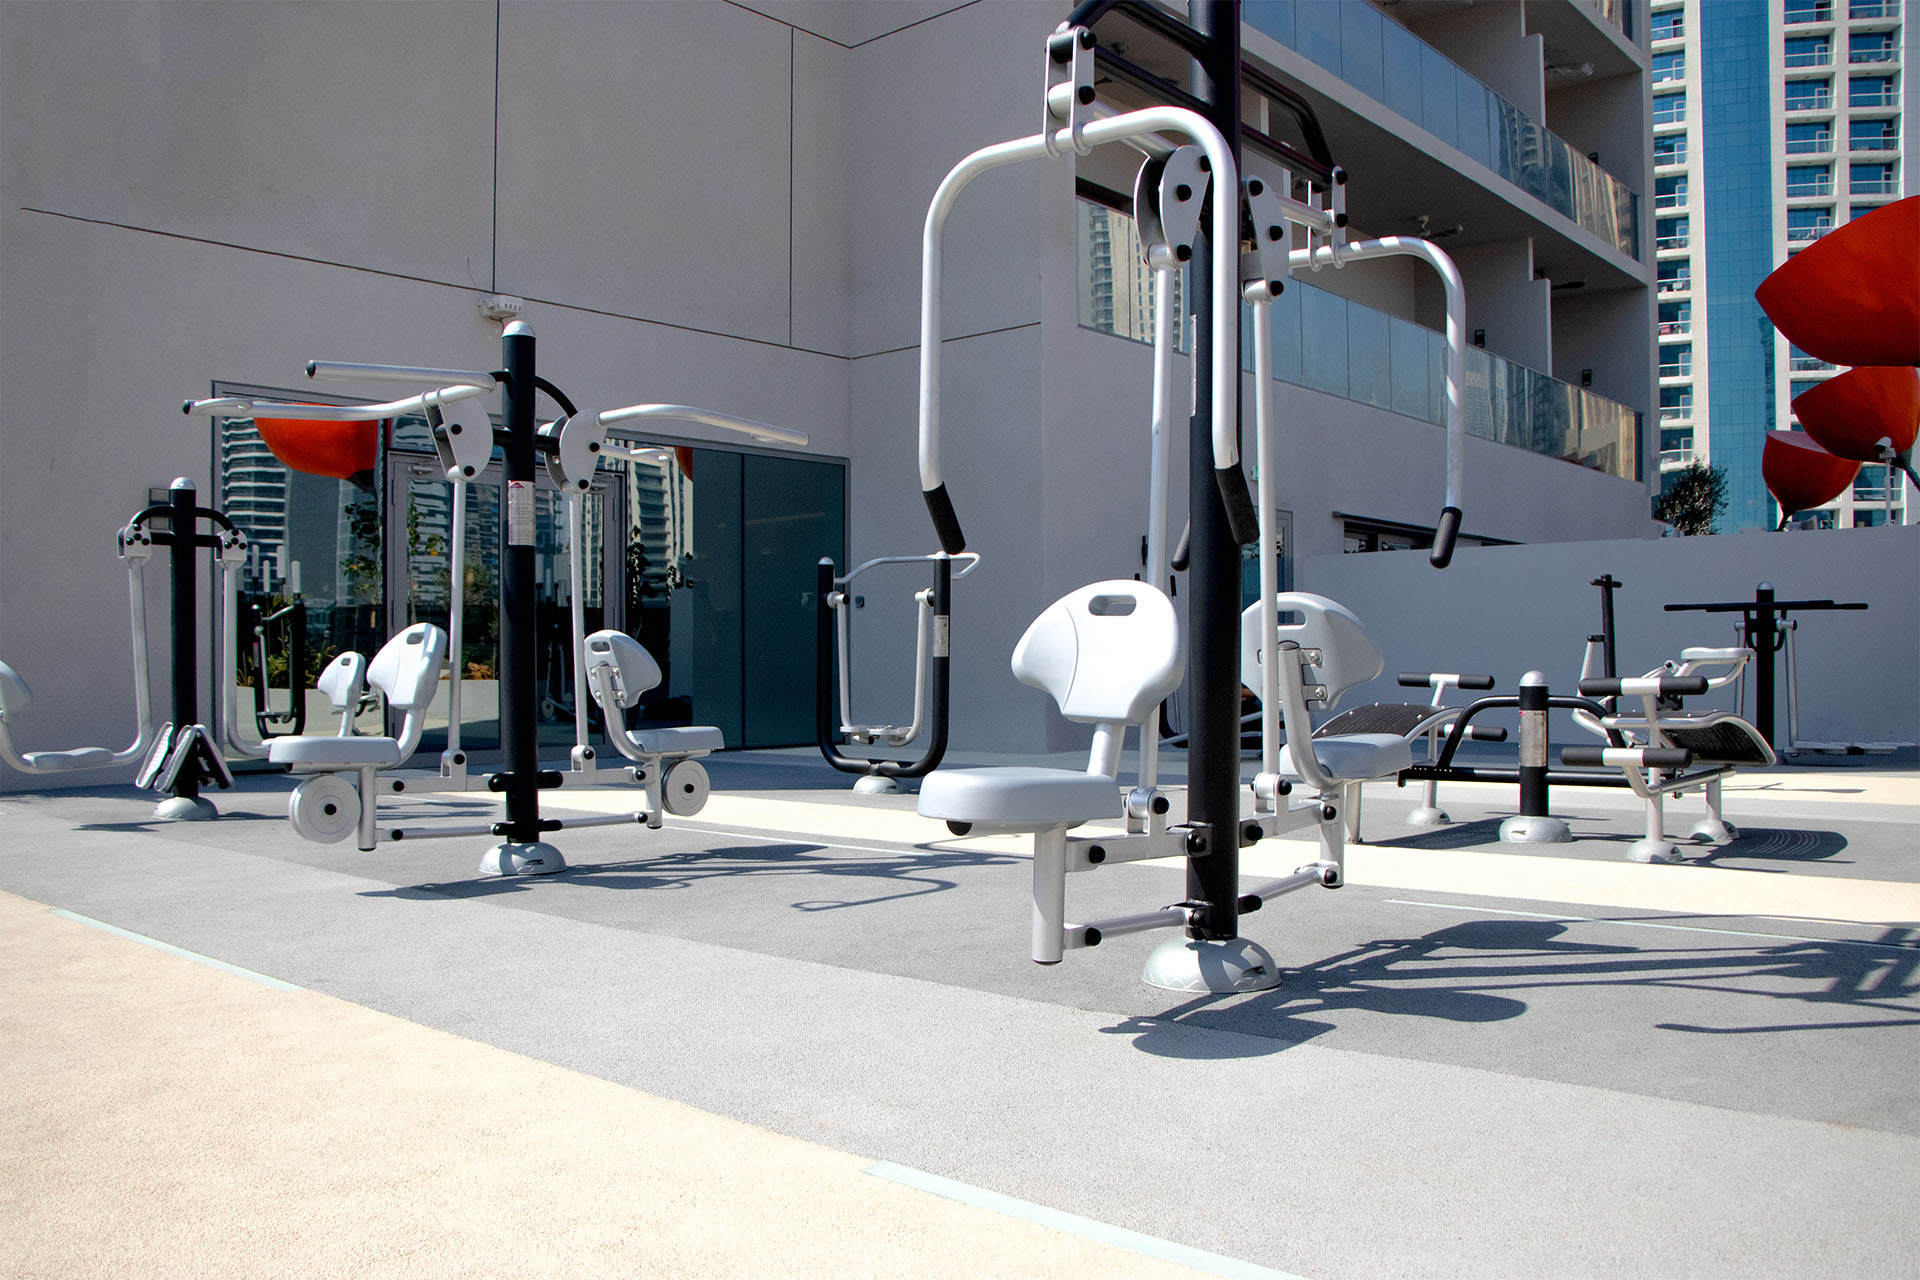 How to Protect Outdoor Gym Equipment